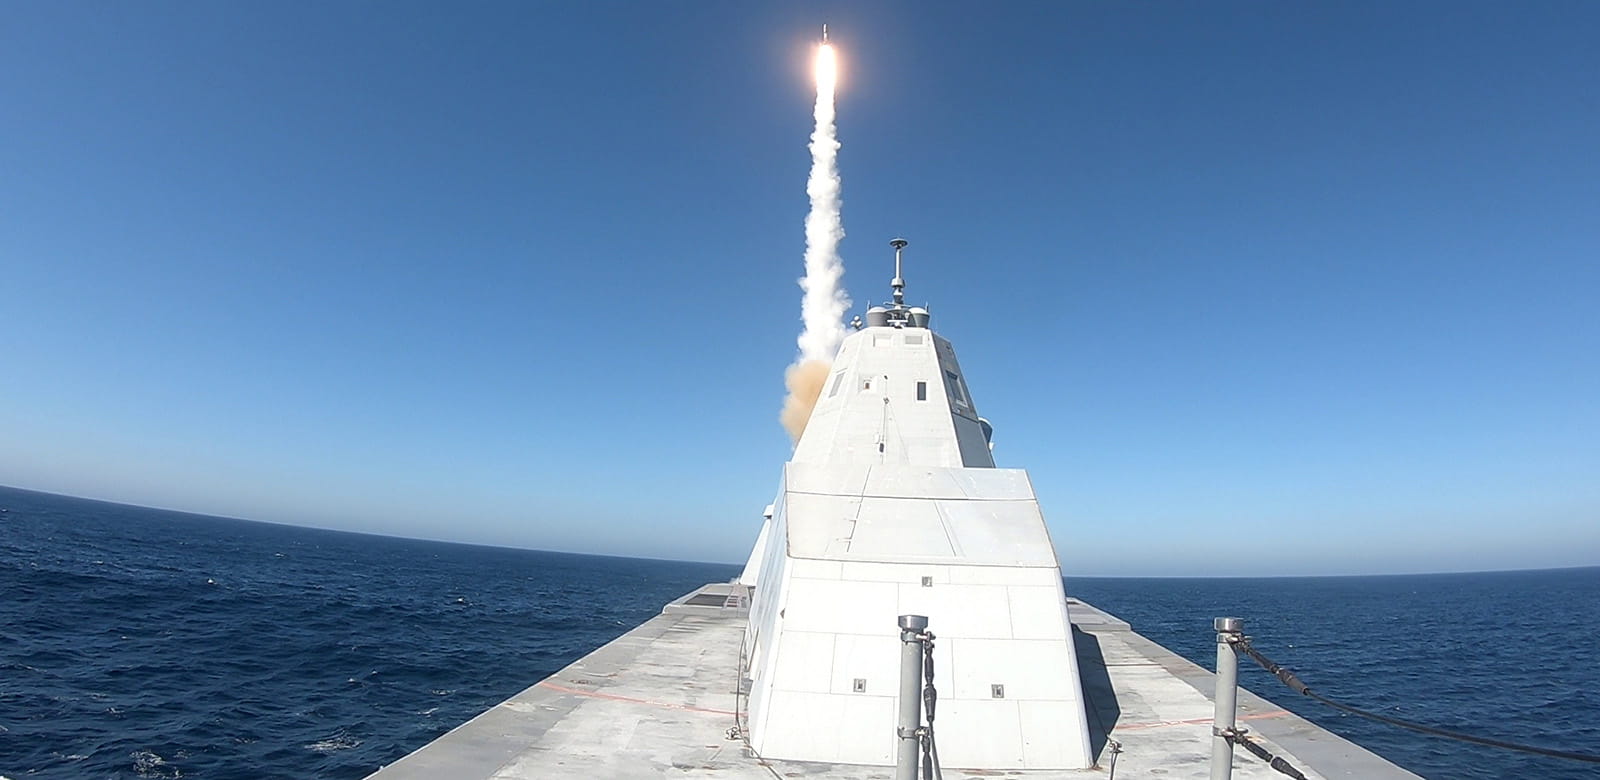 The USS Zumwalt (DDG 1000) successfully conducted its first live-fire missile test with a Standard Missile-2 on the Naval Air Weapons Center Weapons Division Sea Test Range, near Point Mugu, California, on Oct. 13, 2020. (Photo: U.S. Navy)